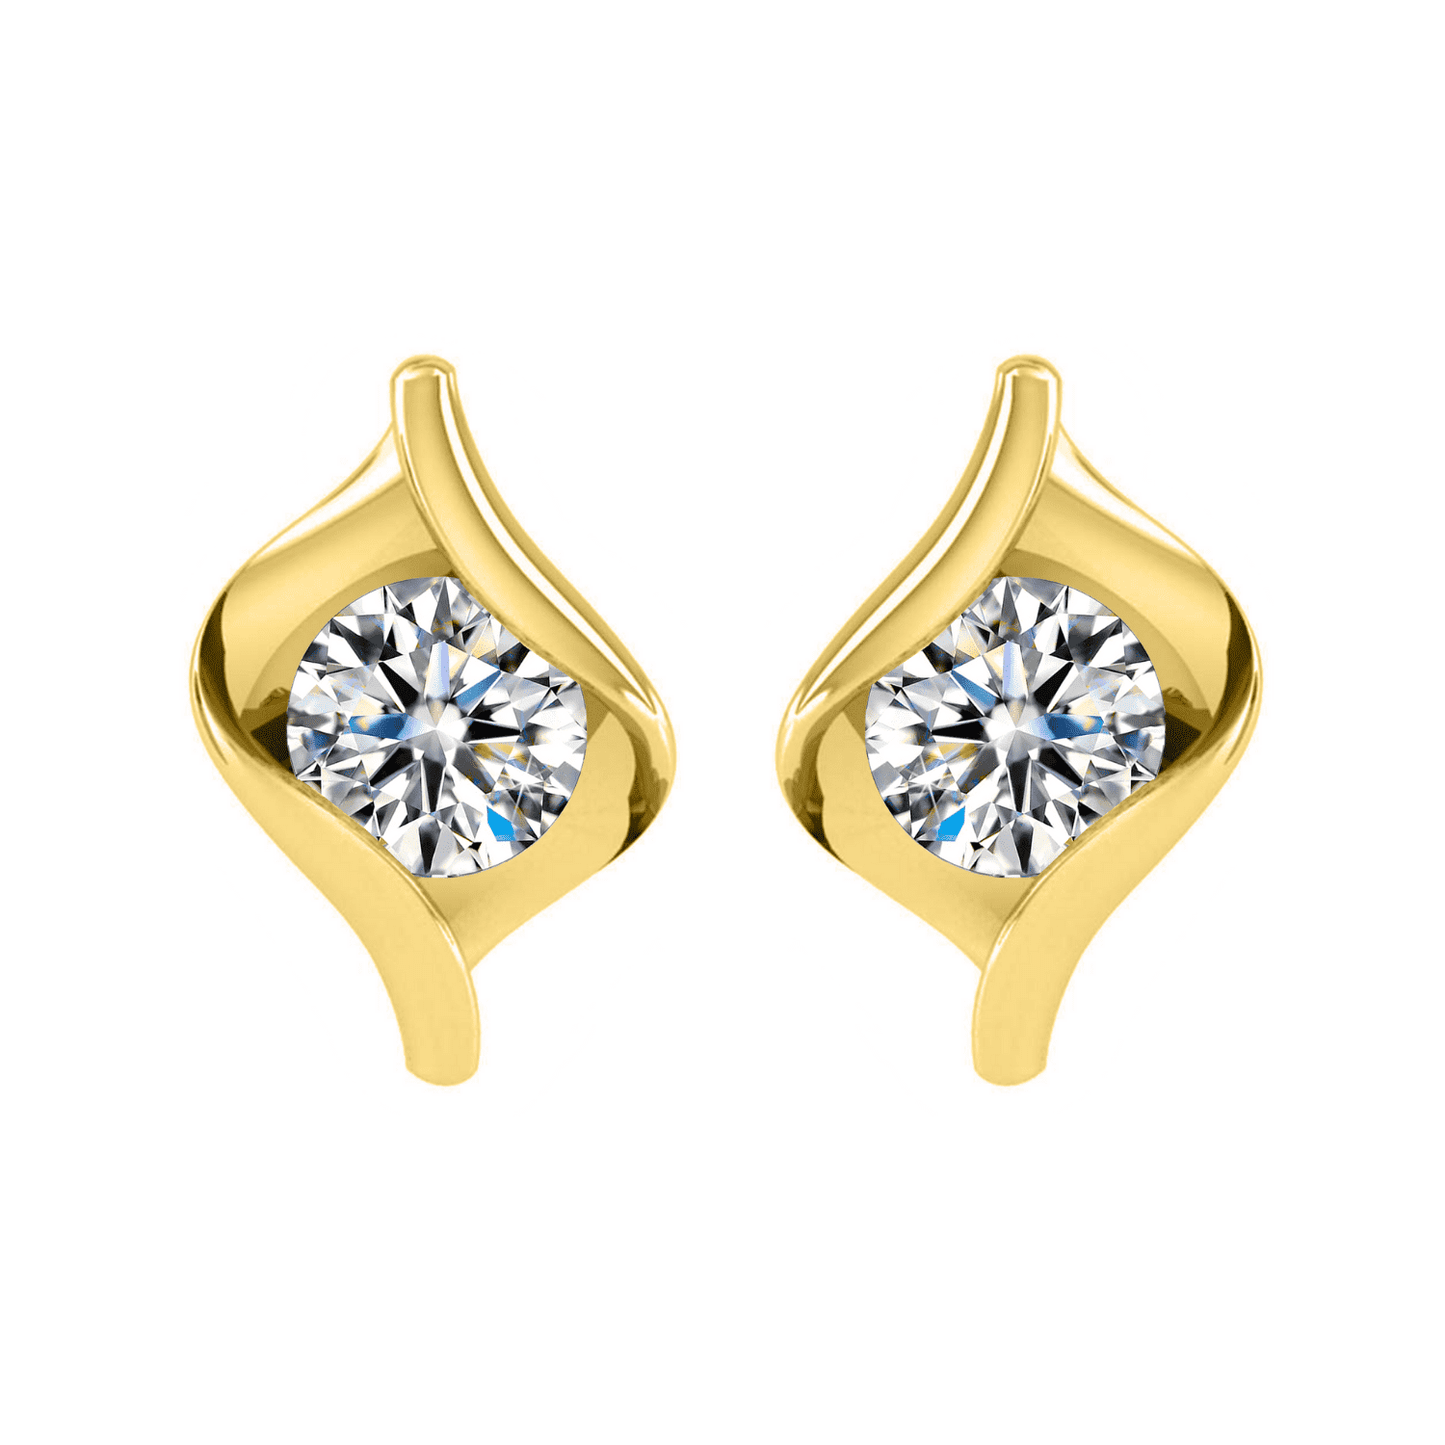 Gold Designer Solitaire Earrings in 92.5 Silver embellished with Swarovski Zirconia - 92.5 Silver in 18K Gold Finish